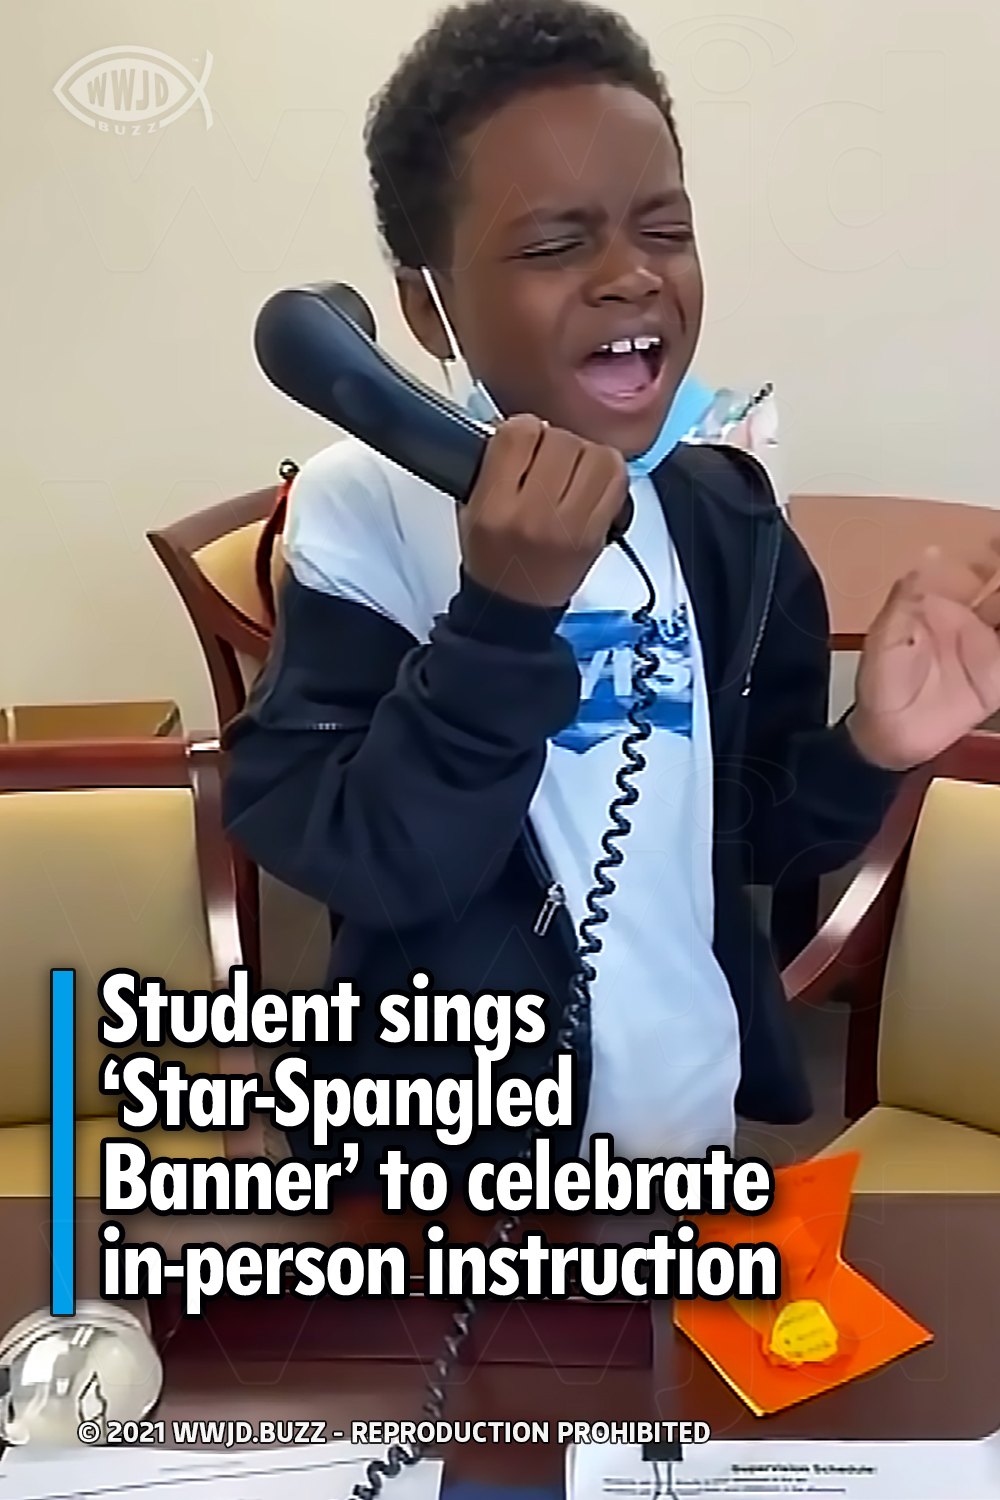 Student sings ‘Star-Spangled Banner’ to celebrate in-person instruction